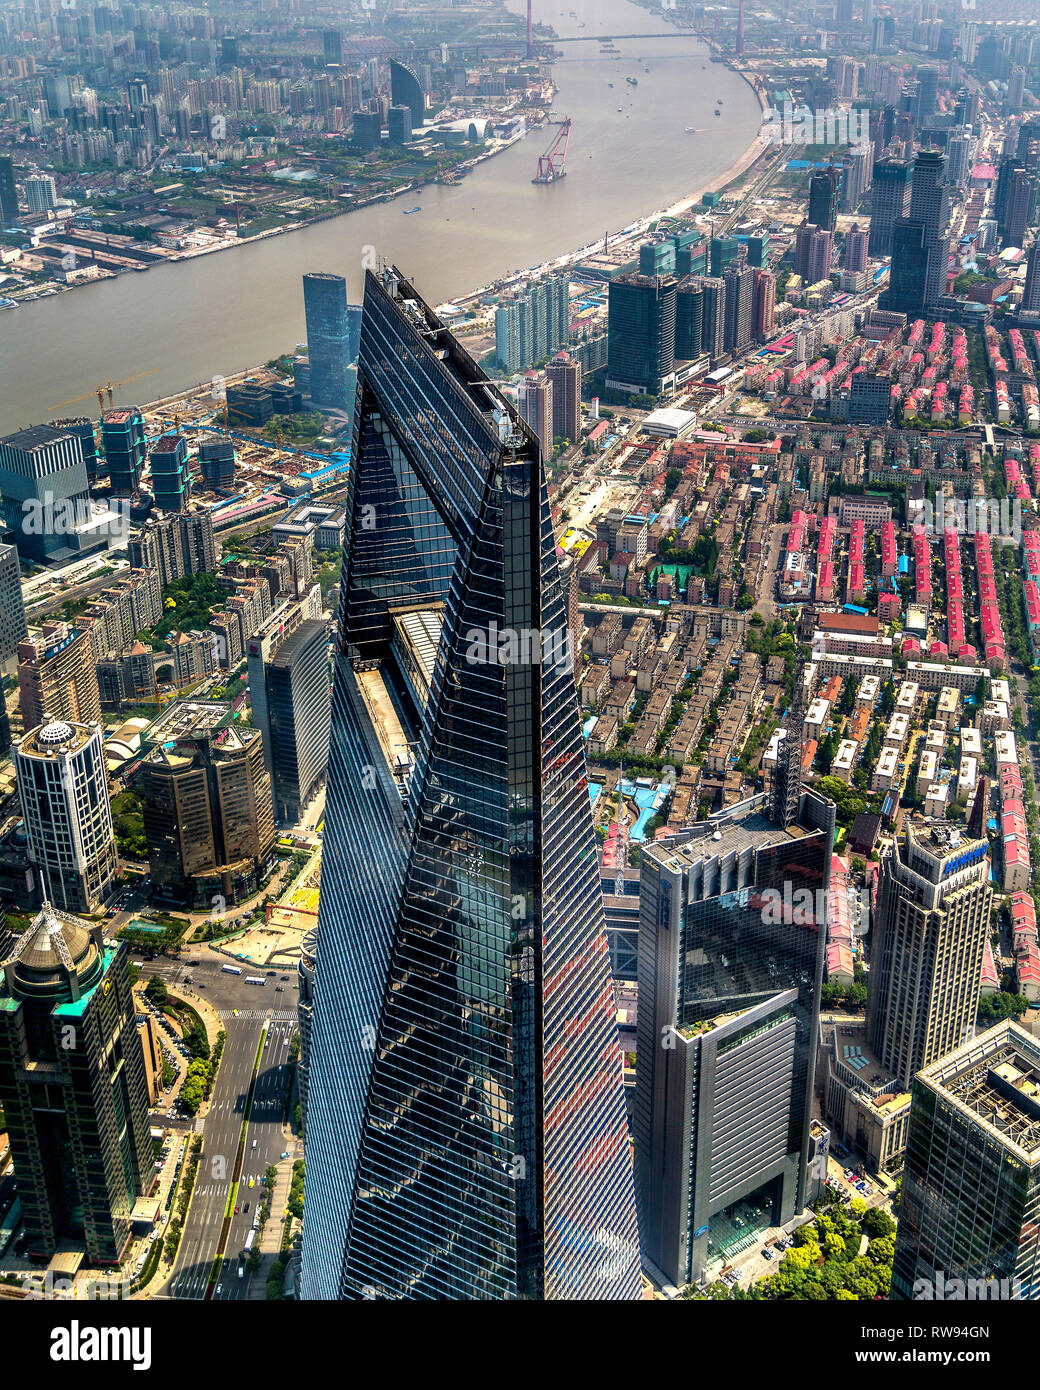 The Shanghai World Financial Center towers above Pudong. In the background a bend in the Huangpu River. Shanghai, China. Stock Photo